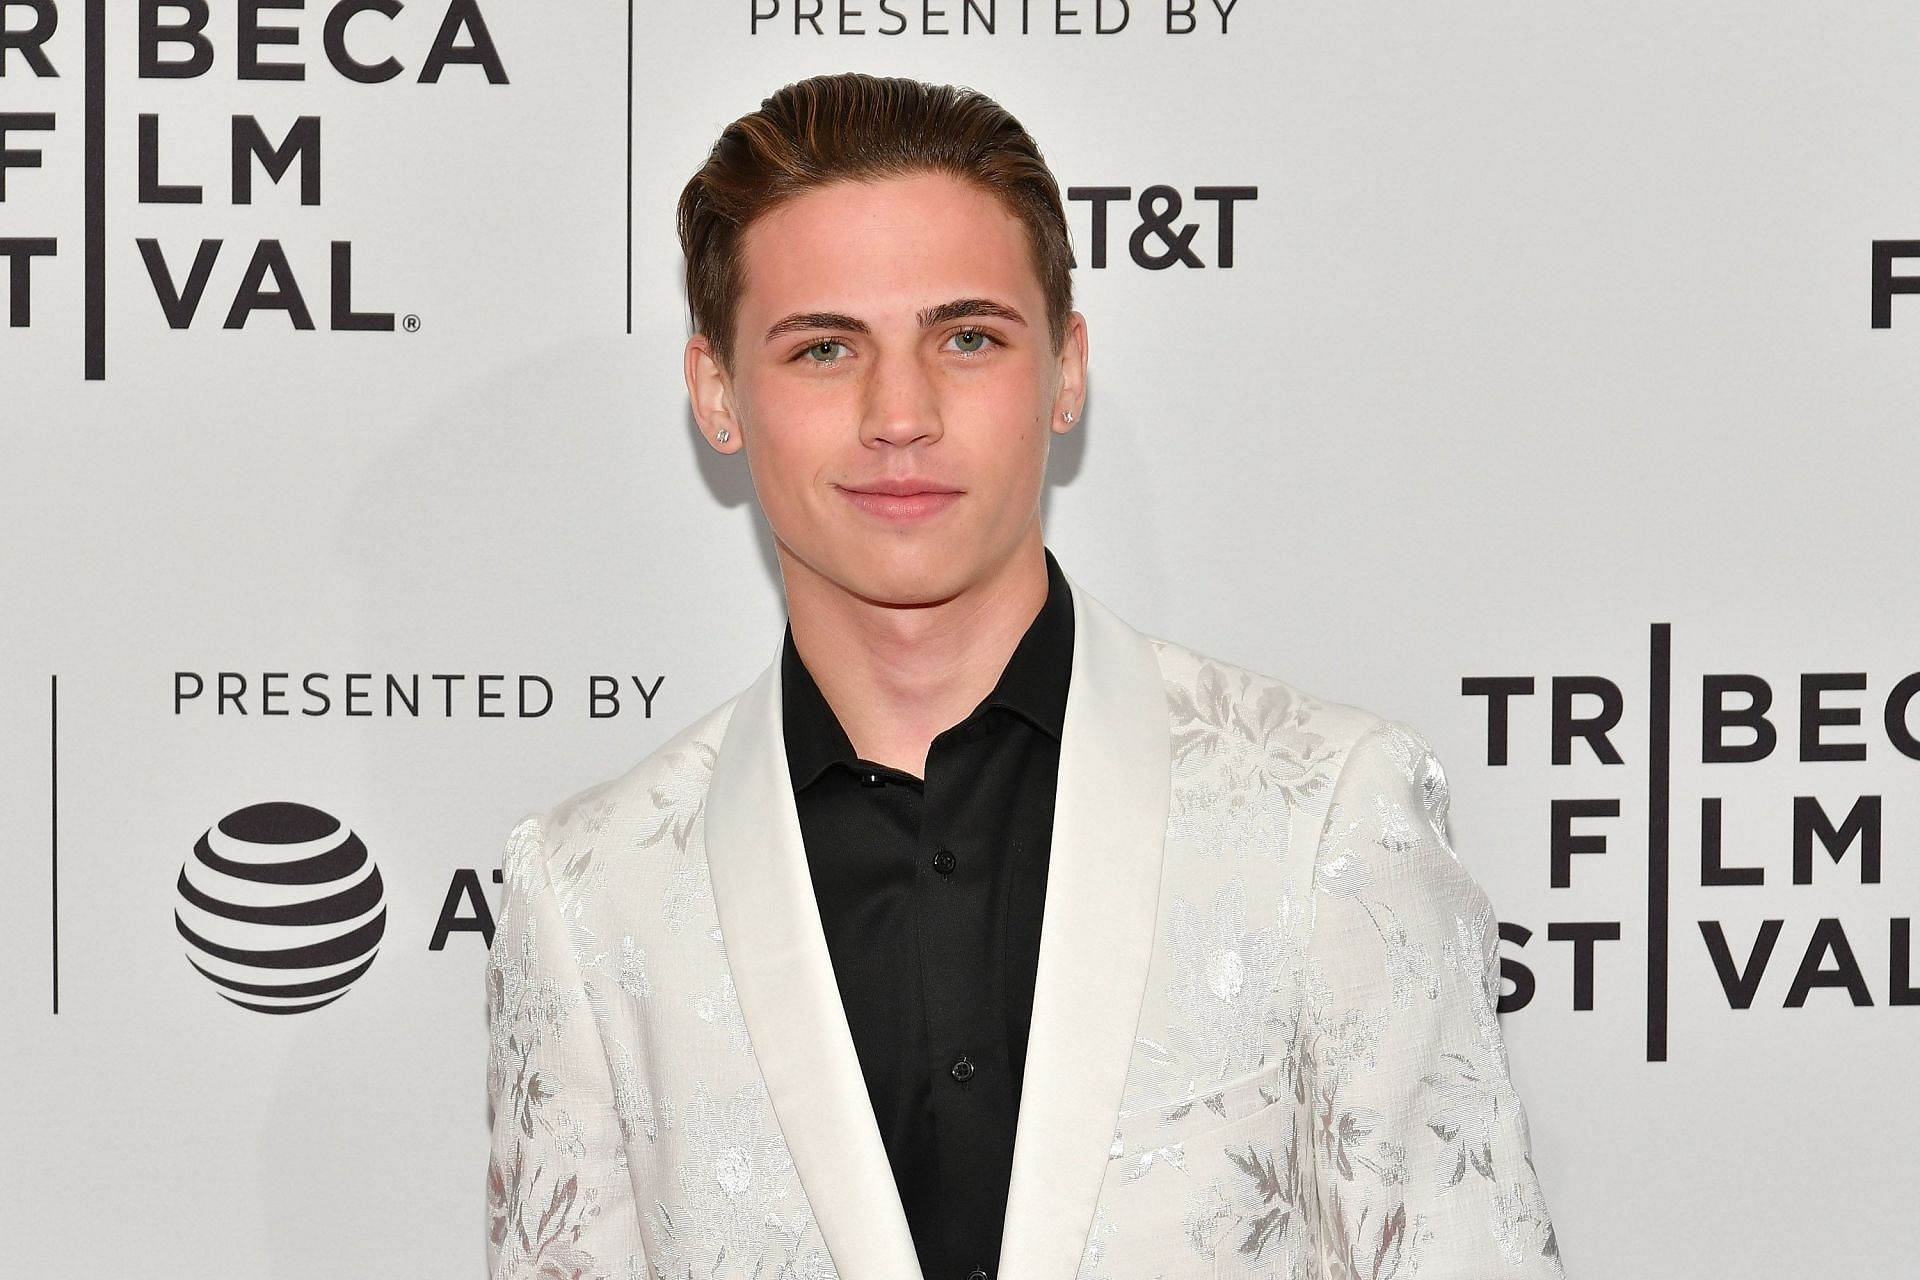 5 lesser-known facts about Cobra Kai star Tanner Buchanan aka Robby (Image via Getty)